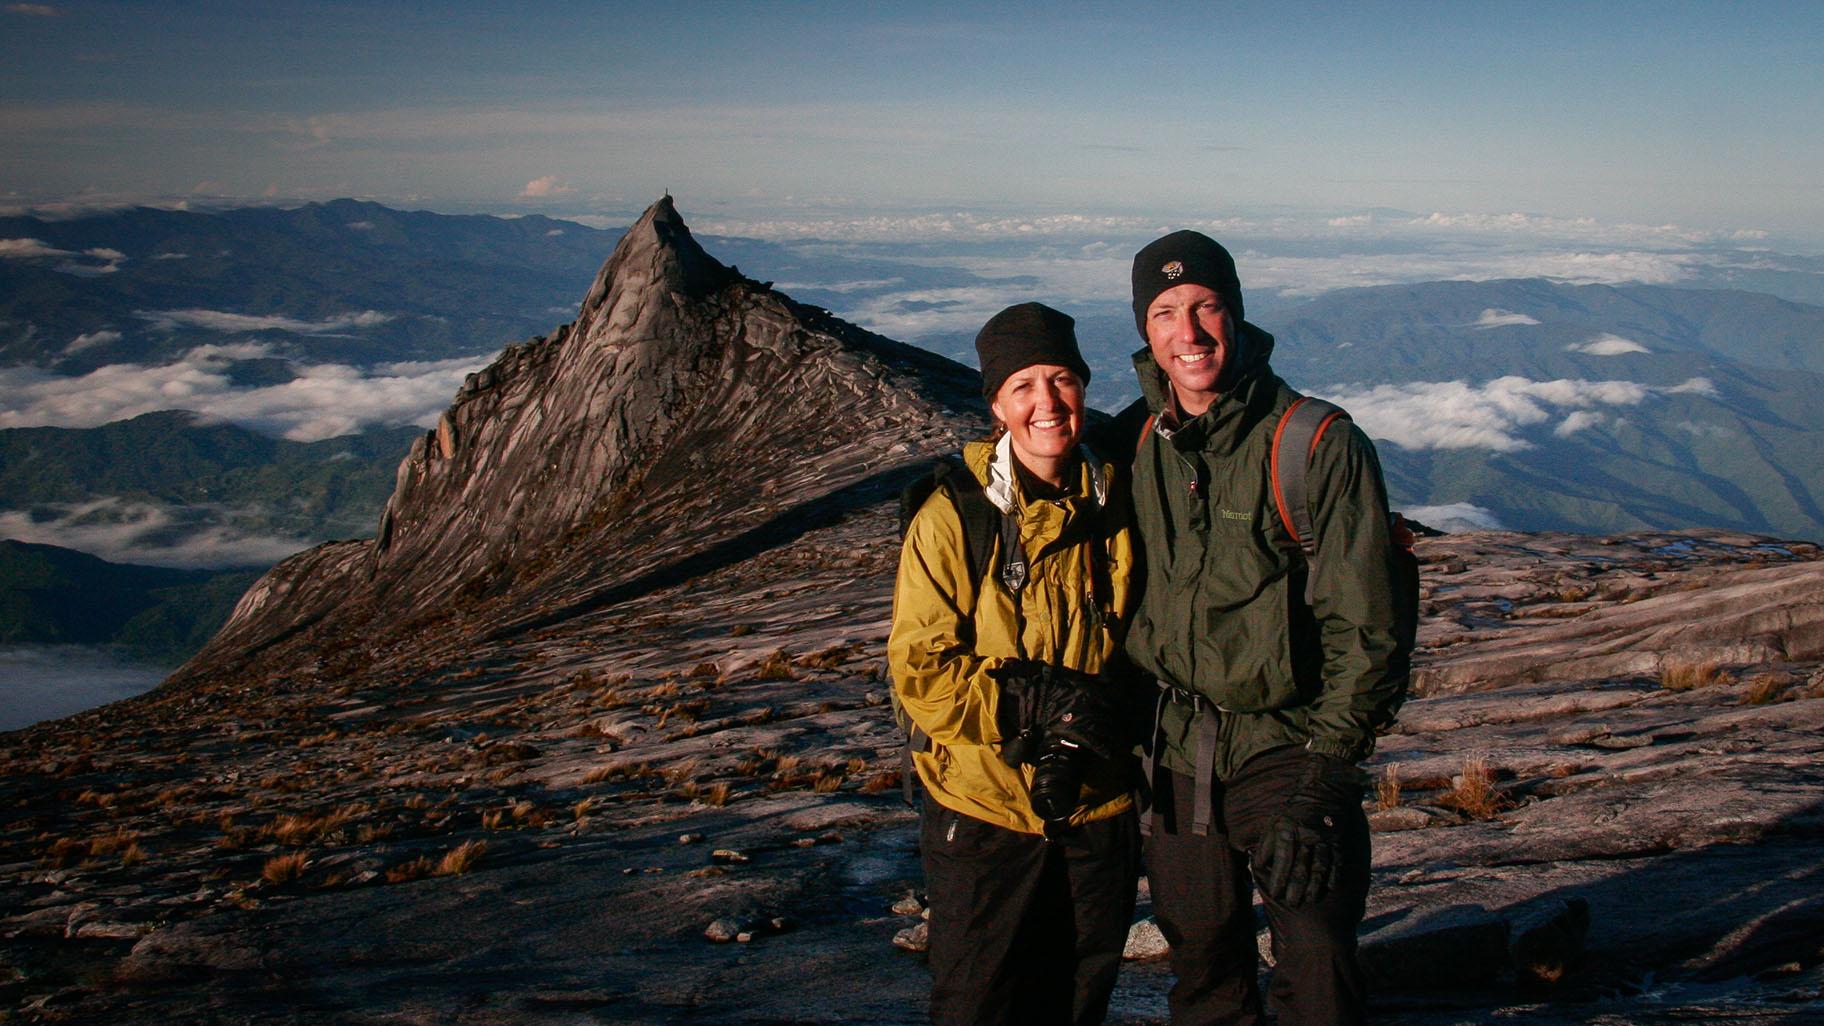 Alison Newberry and Matt Sparapani in Mount Kinabalu, Borneo. (Courtesy of Alison Newberry and Matt Sparapani)